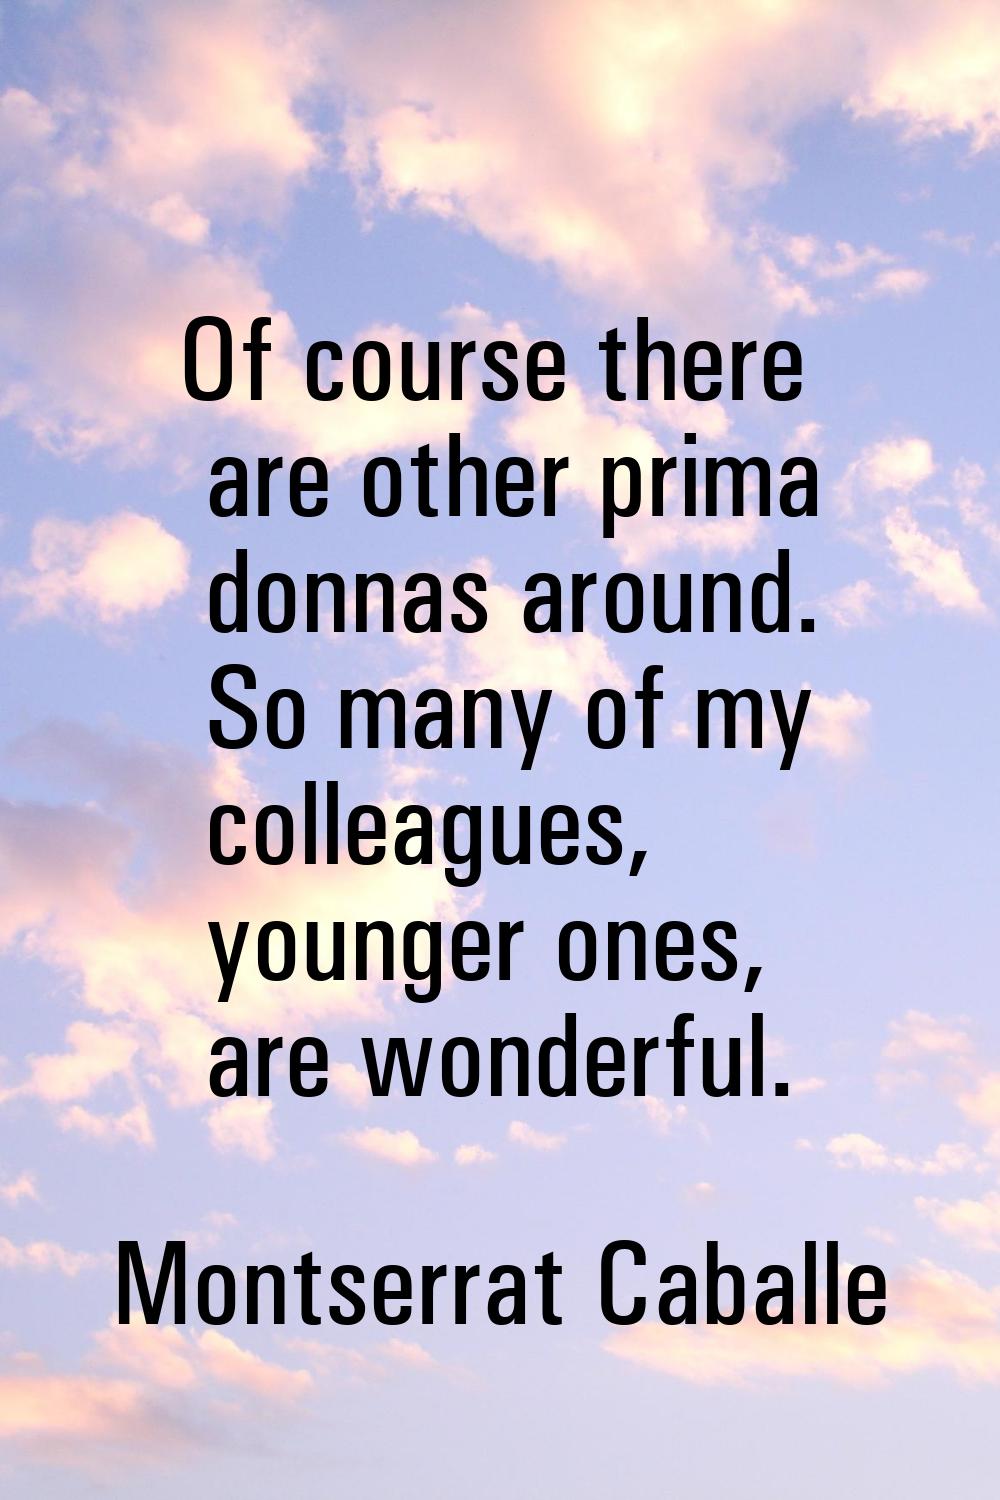 Of course there are other prima donnas around. So many of my colleagues, younger ones, are wonderfu